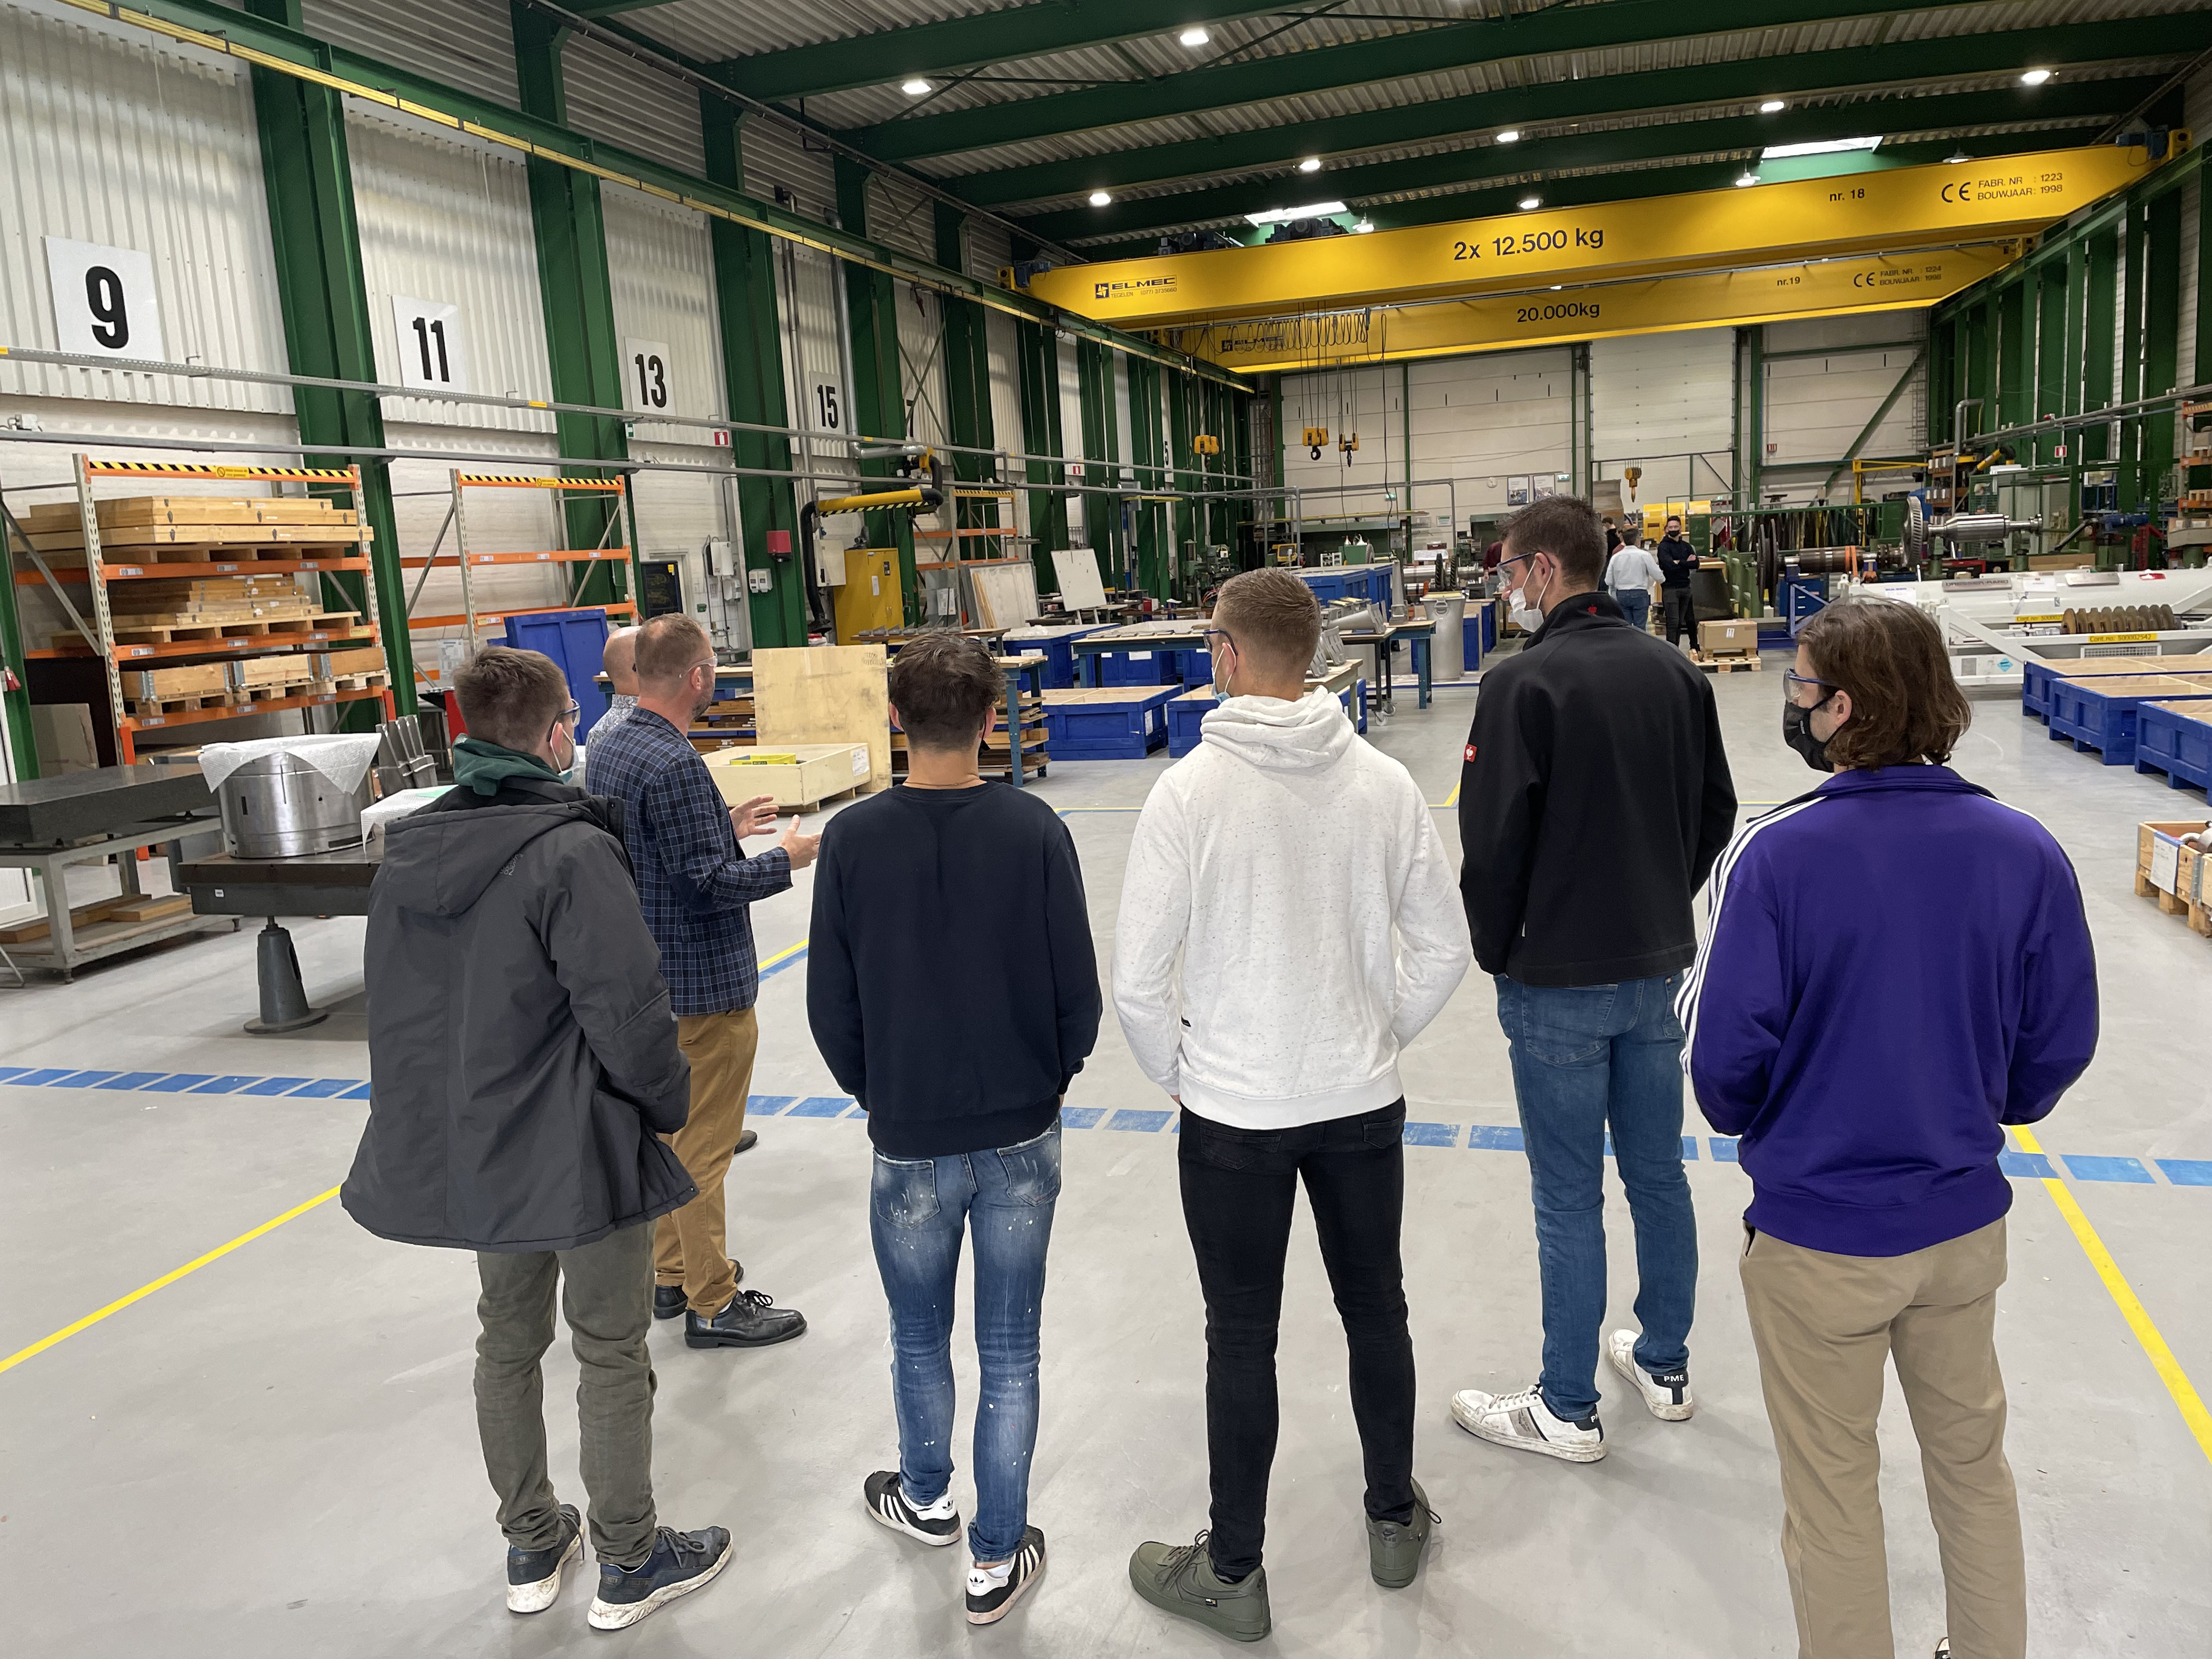 A tour of the workshop was given so the students had a good understanding of Sulzer’s operations